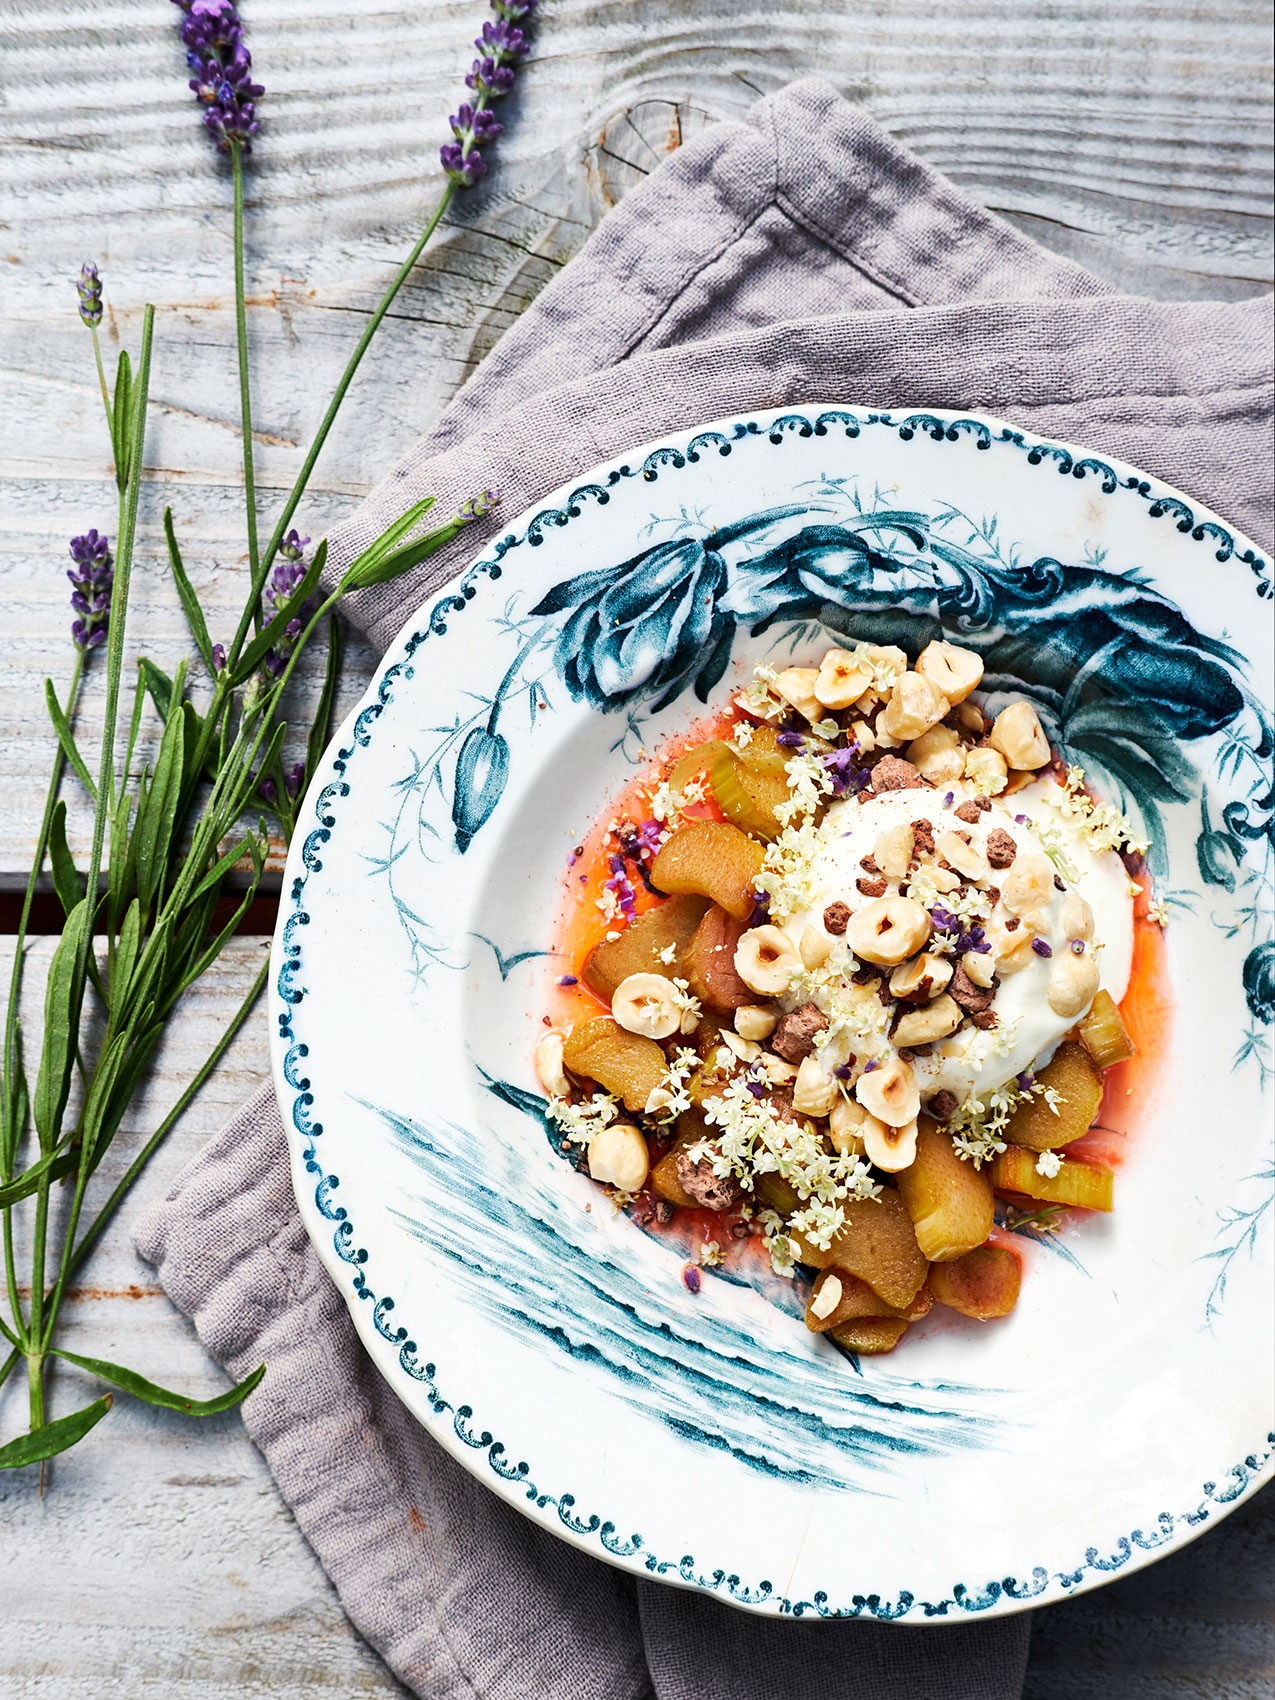 Stedsans in the Woods • Rhubarb Parfait with Lavender Flowers & Nuts • Lifestyle & Editorial Food Photography